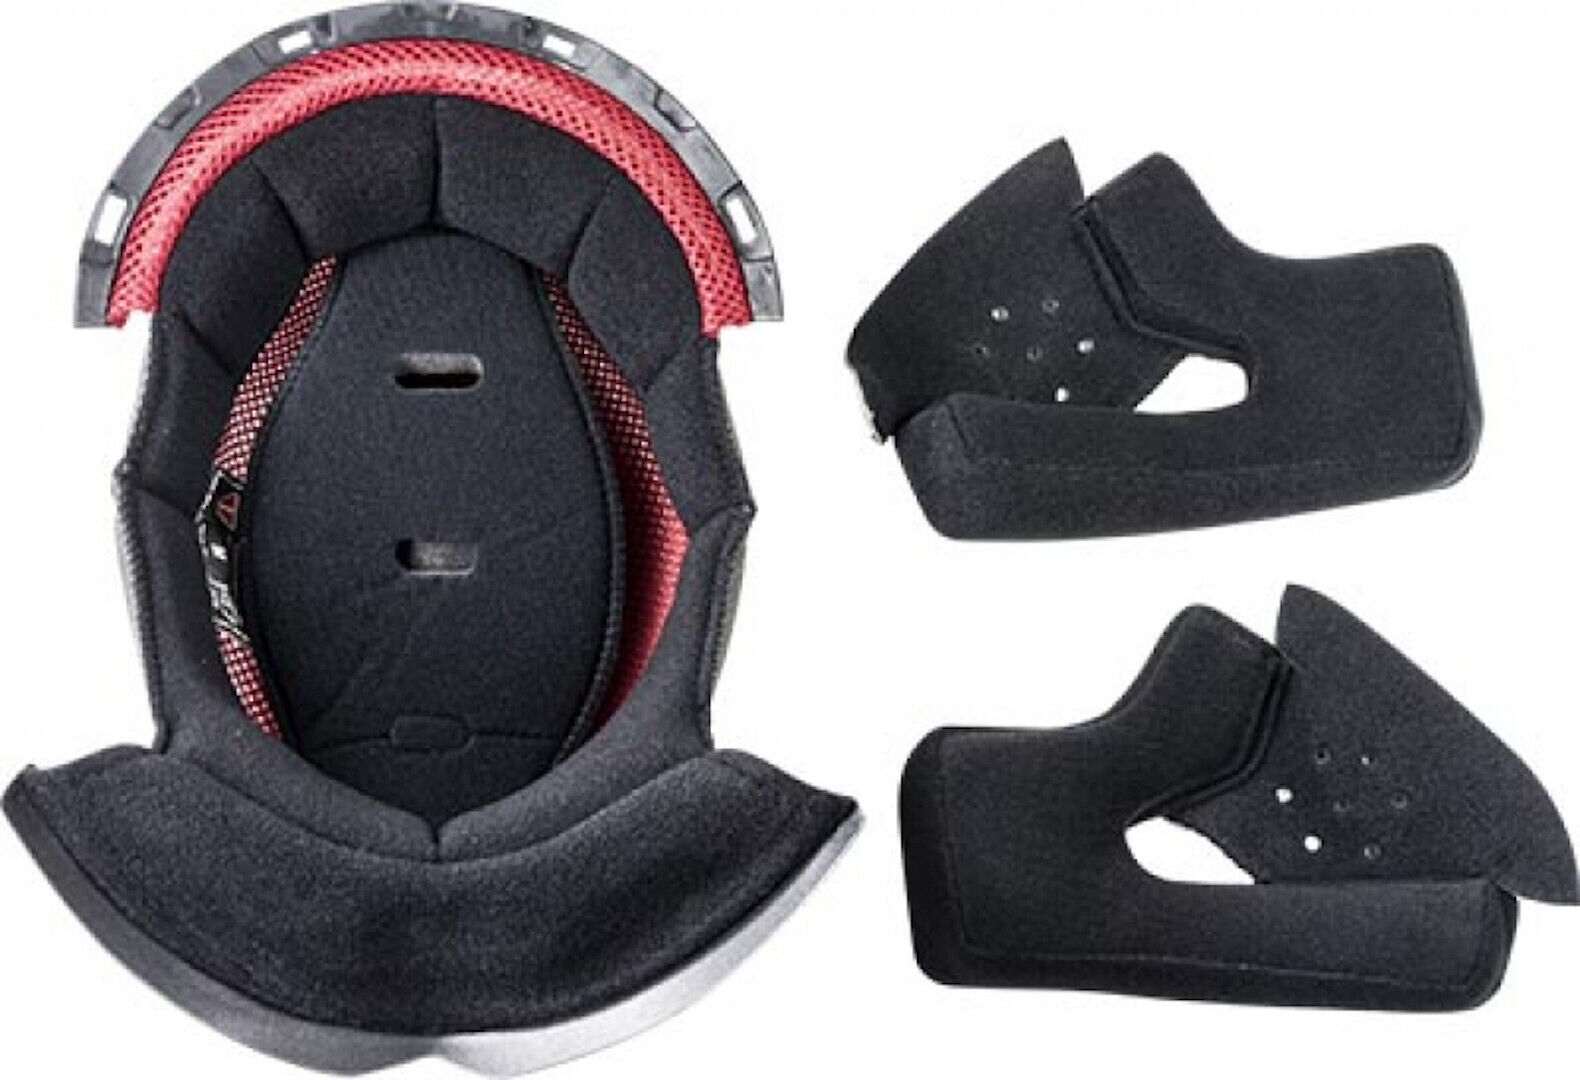 Photos - Other for Motorcycles LS2 Ff353j Rapid Mini Inner Lining & Cheek Pads Unisex Black Size: S 80011 